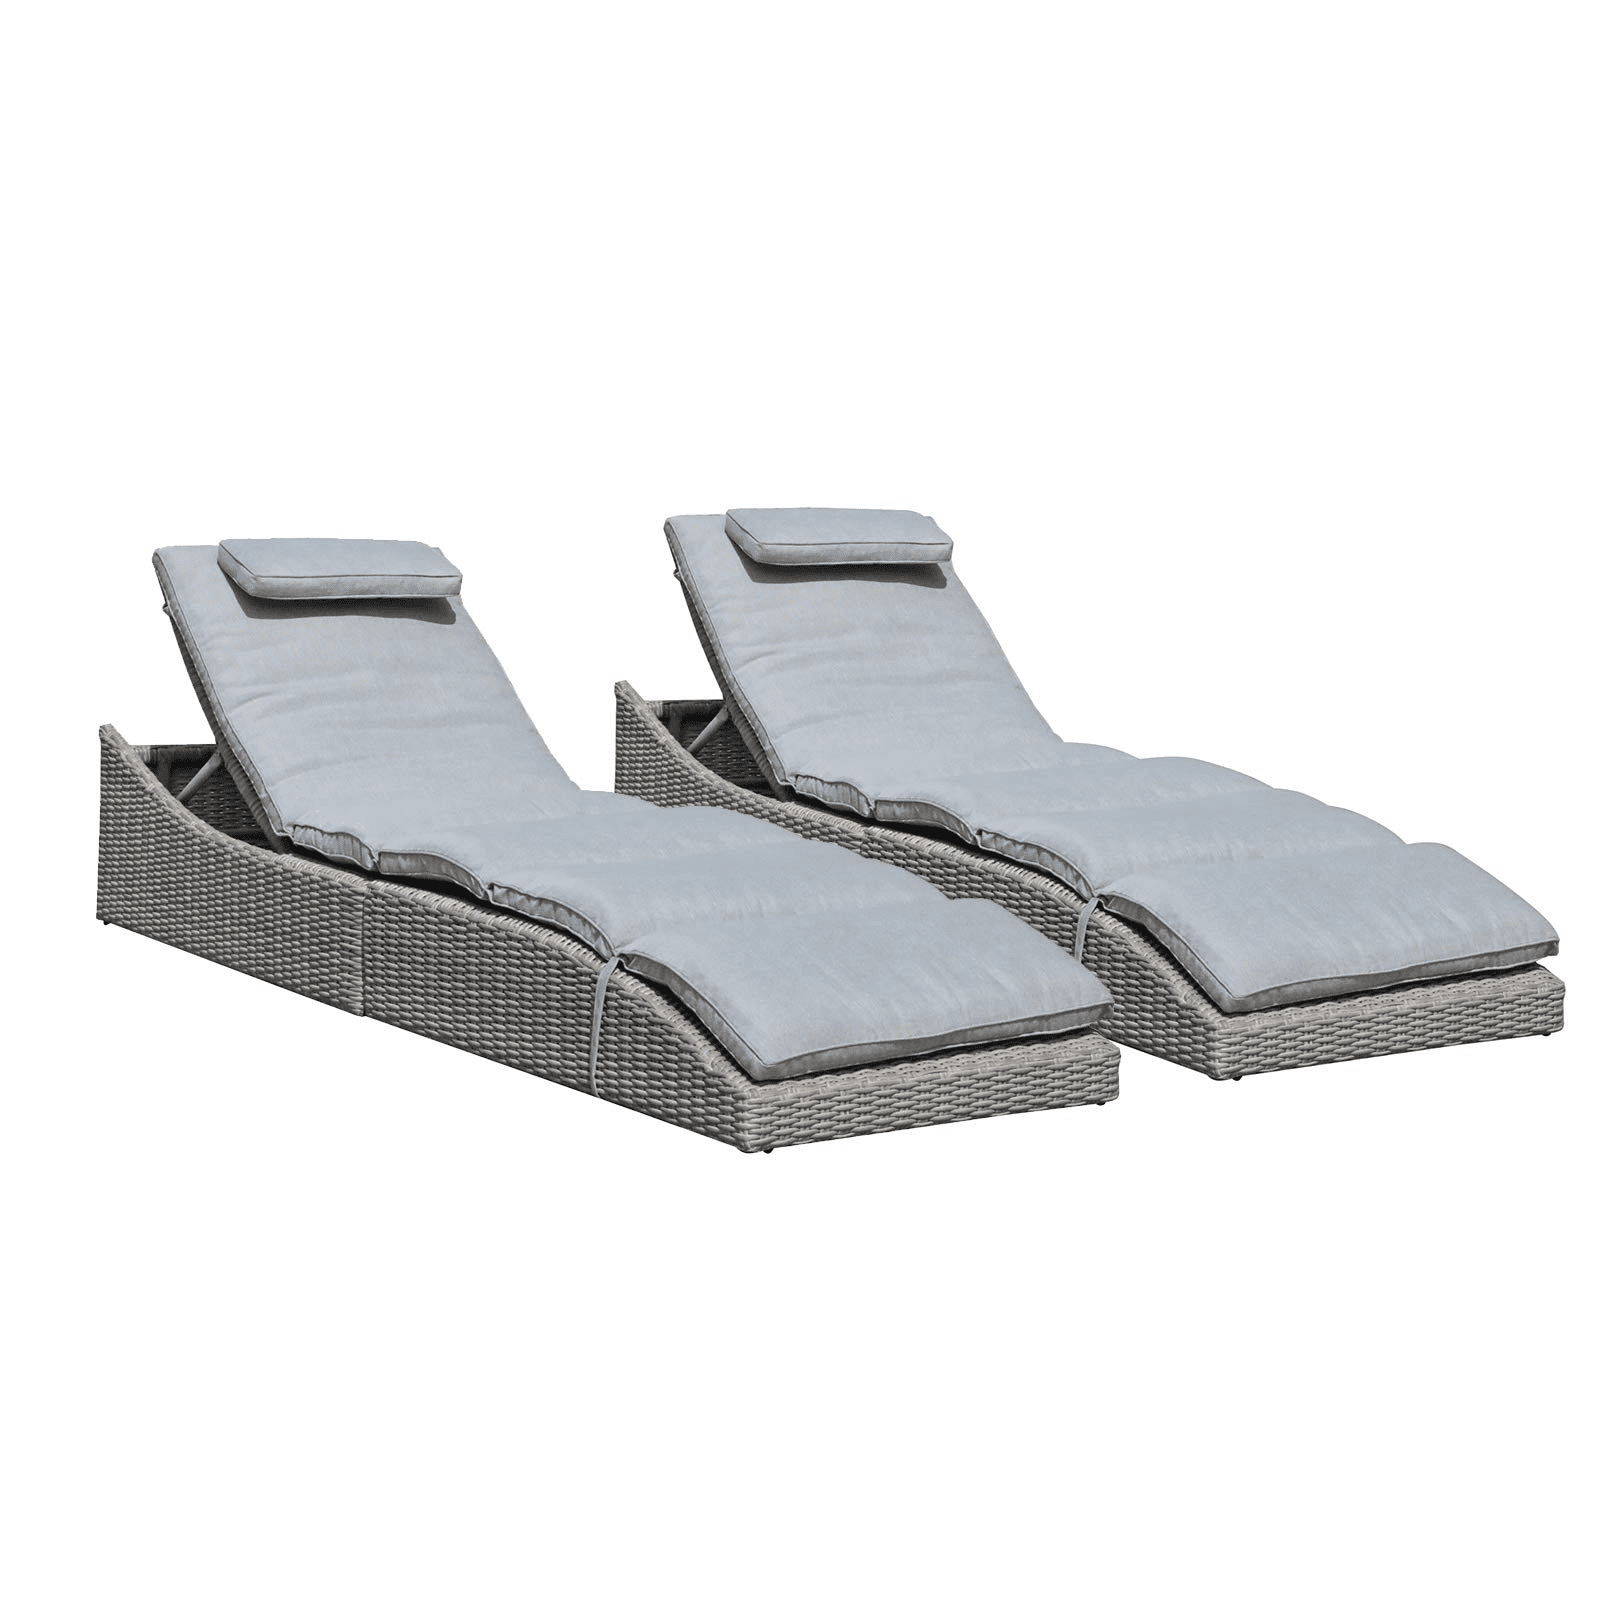 Gray DOIT Outdoor Patio Lounge Chairs Set of 2,Patio Reclining Adjustable Chaise Lounge,Lounge Chairs for Pool Area,Foldable Lounge Chairs Outdoor 